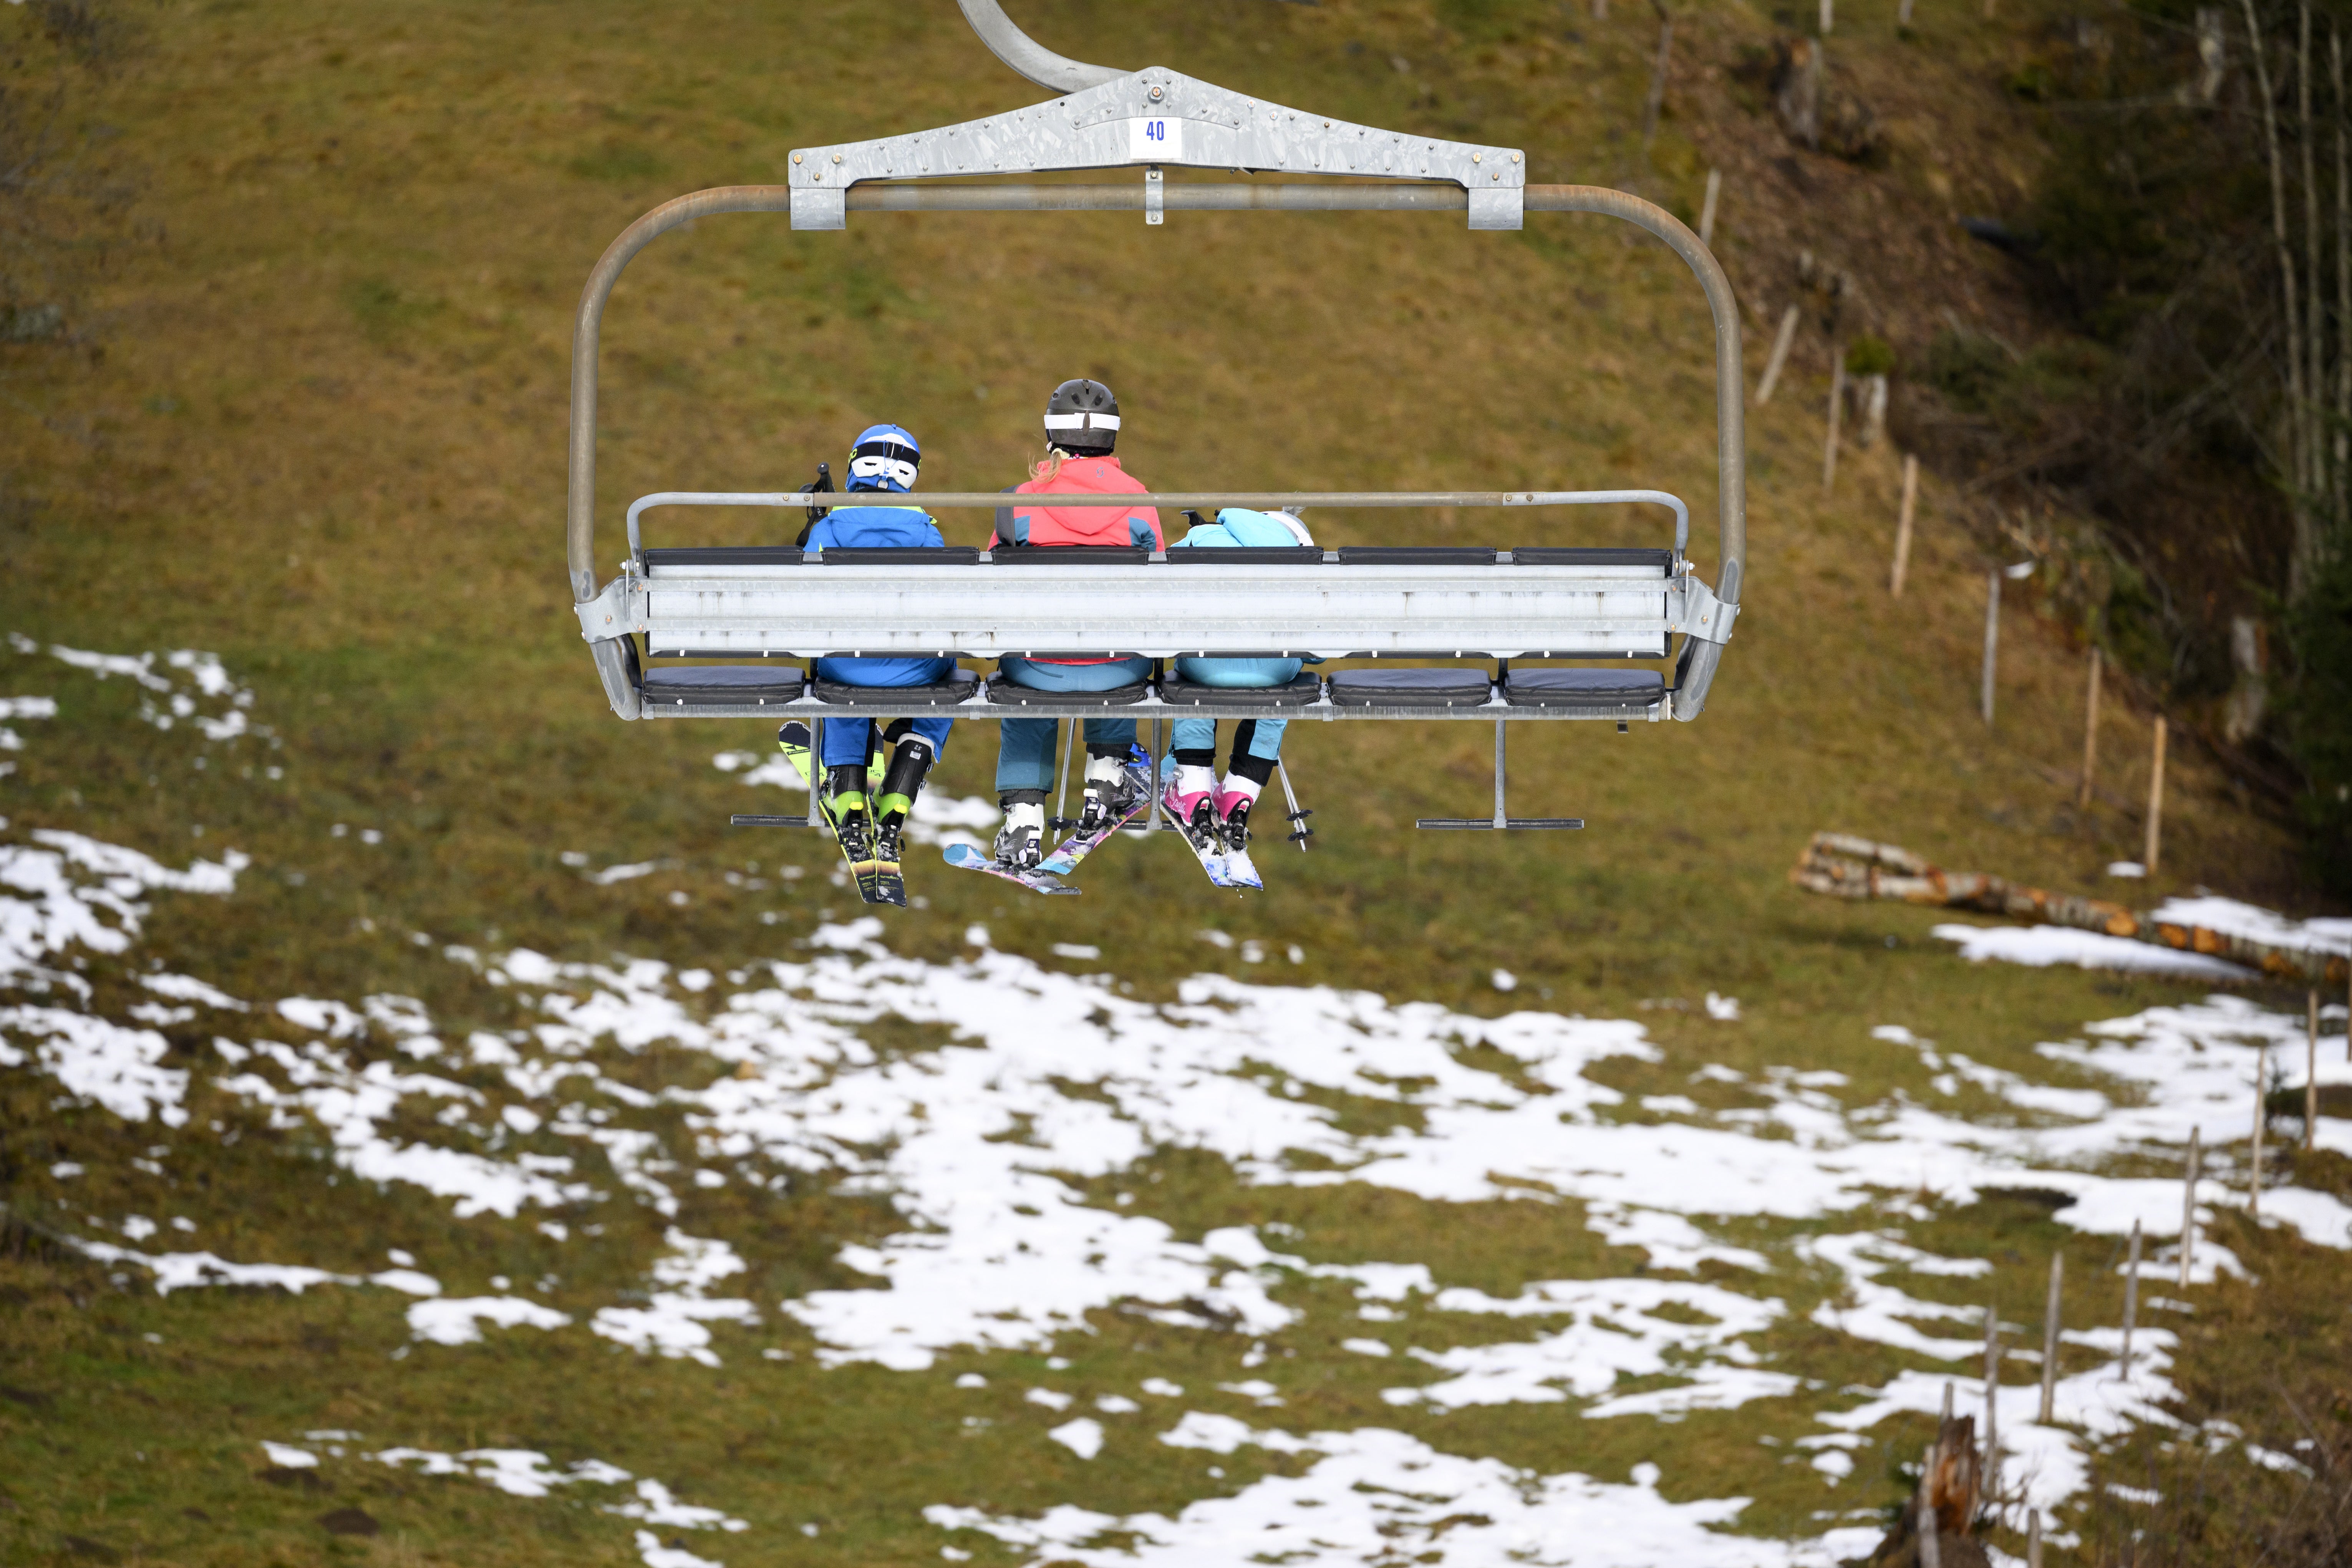 Skiers ride a chairlift between La Rasse et Chaux Ronde above a snowless field